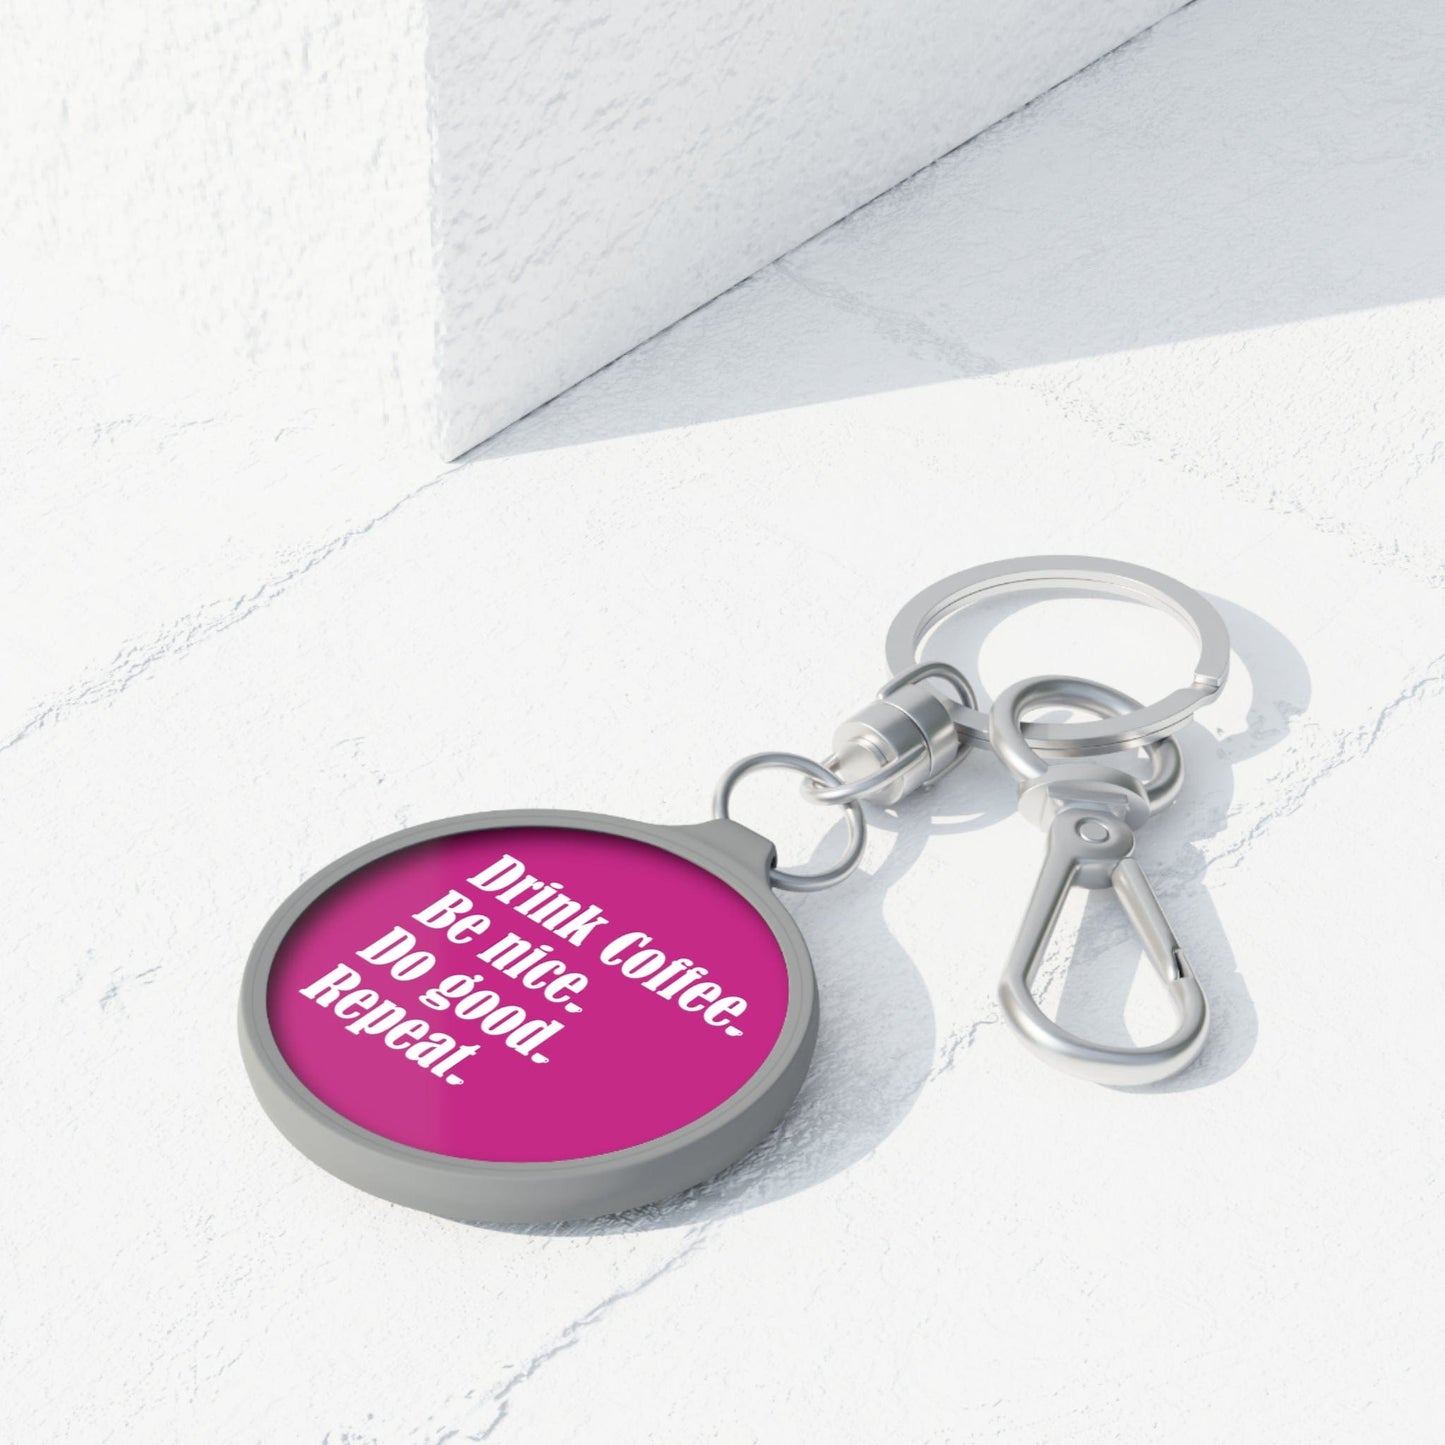 Good Bean Gifts "Drink Coffee, Be Nice, Do Good, Repeat". Keyring Tag (Pink w/gray trim) One size / Grey